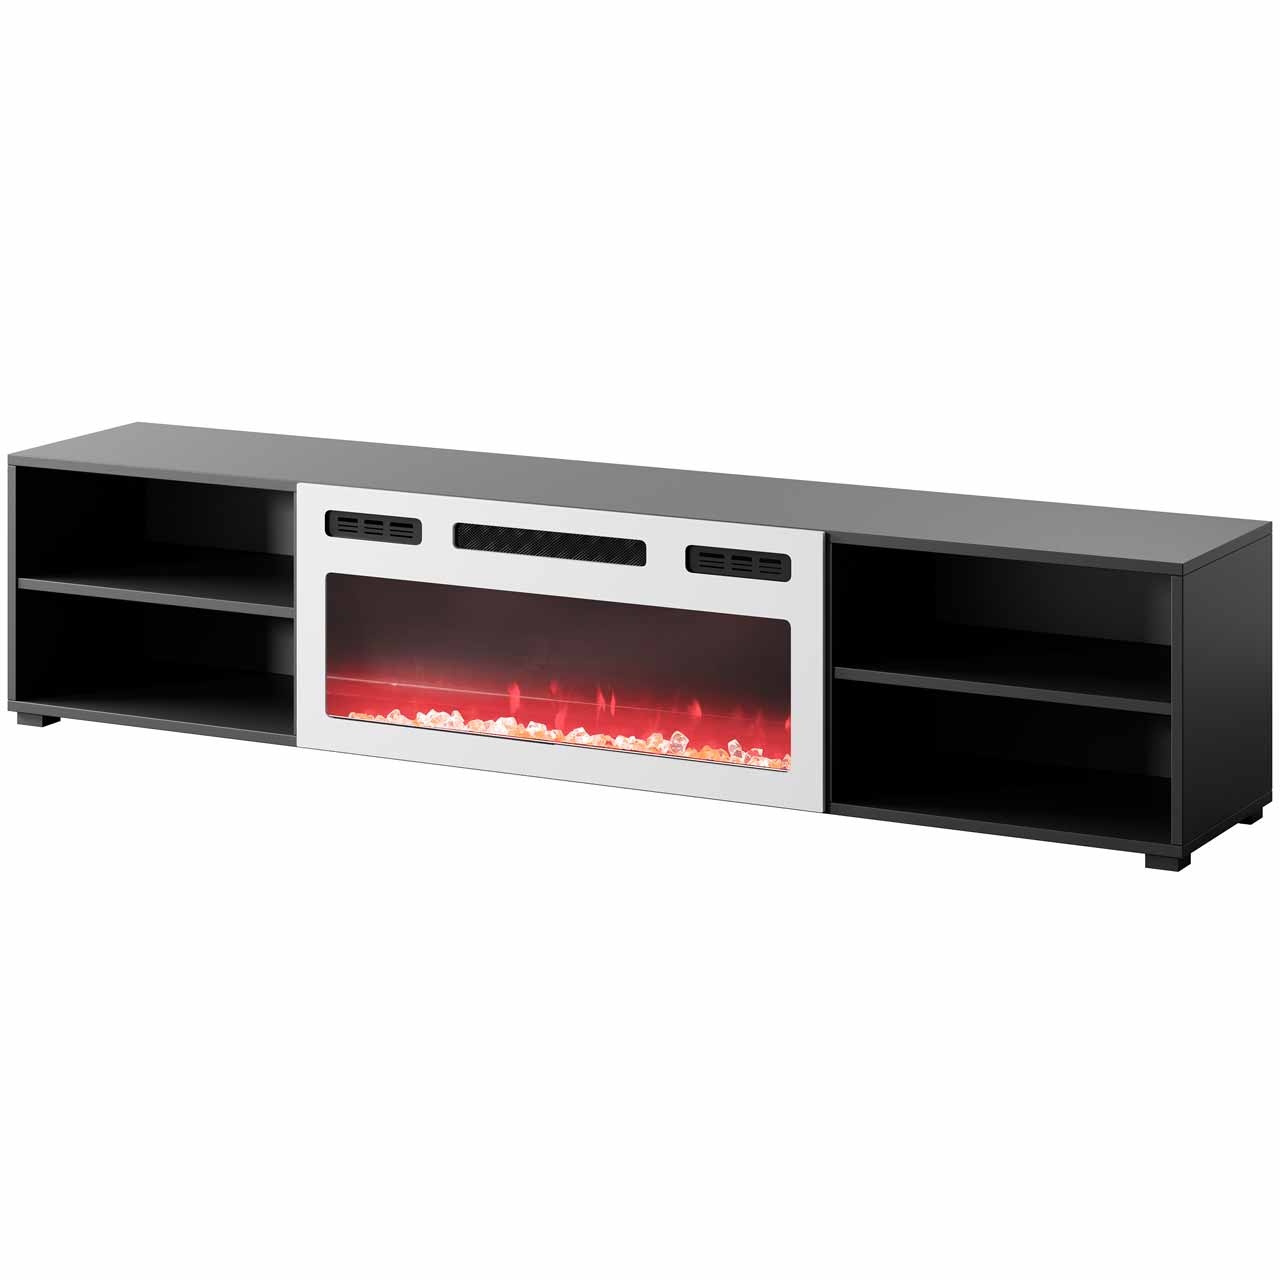 TV Cabinet POLO 180 EF black / fireplace white